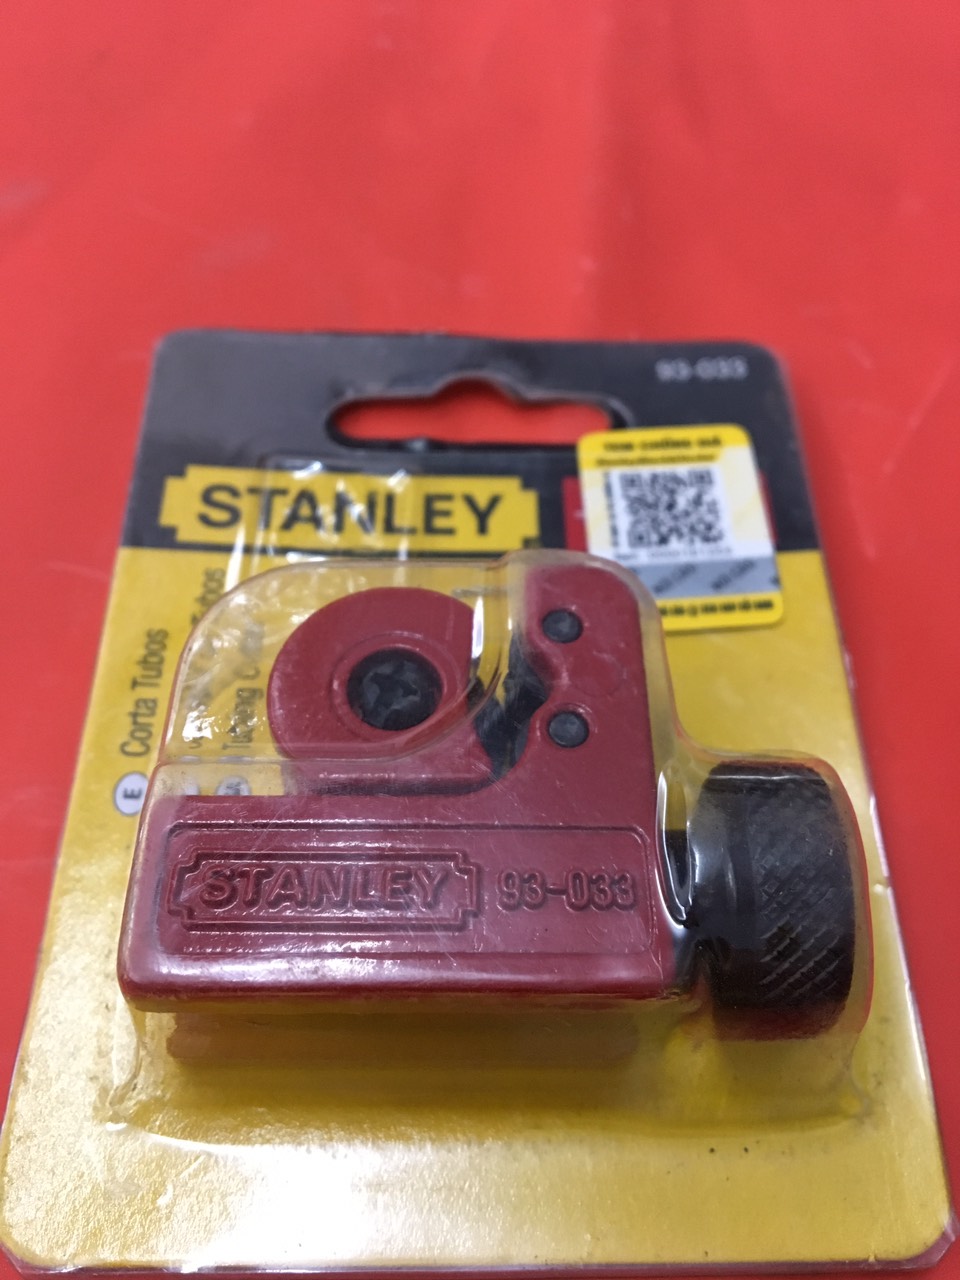  Dao cắt ống Stanley 93-033-22